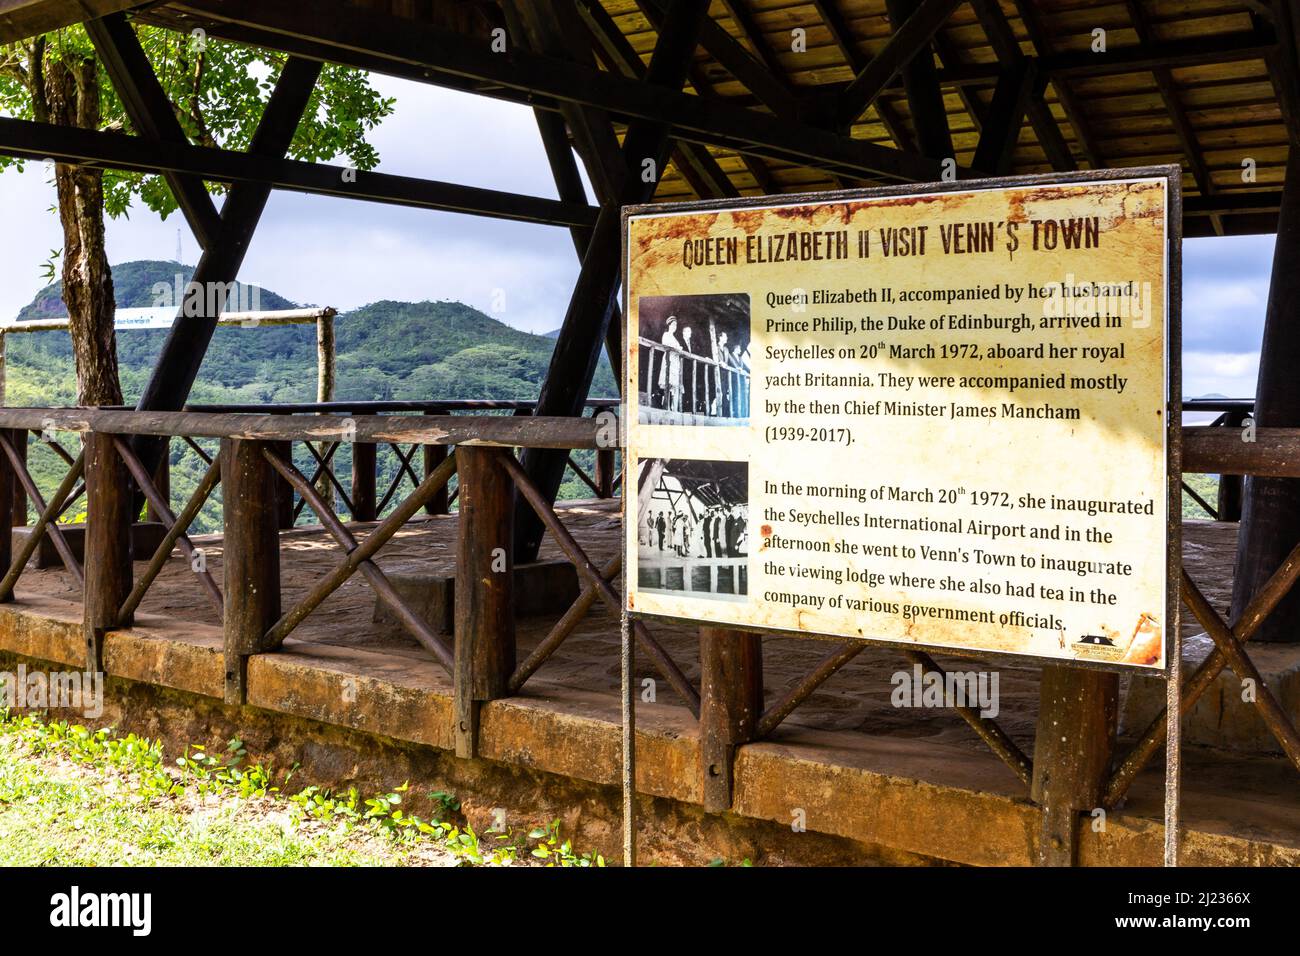 Mahe, Seychelles, 3.05.2021. Venn's Town - Mission Lodge viewing platform with tourist information board about Queen Elizabeth II visit in 1972. Stock Photo